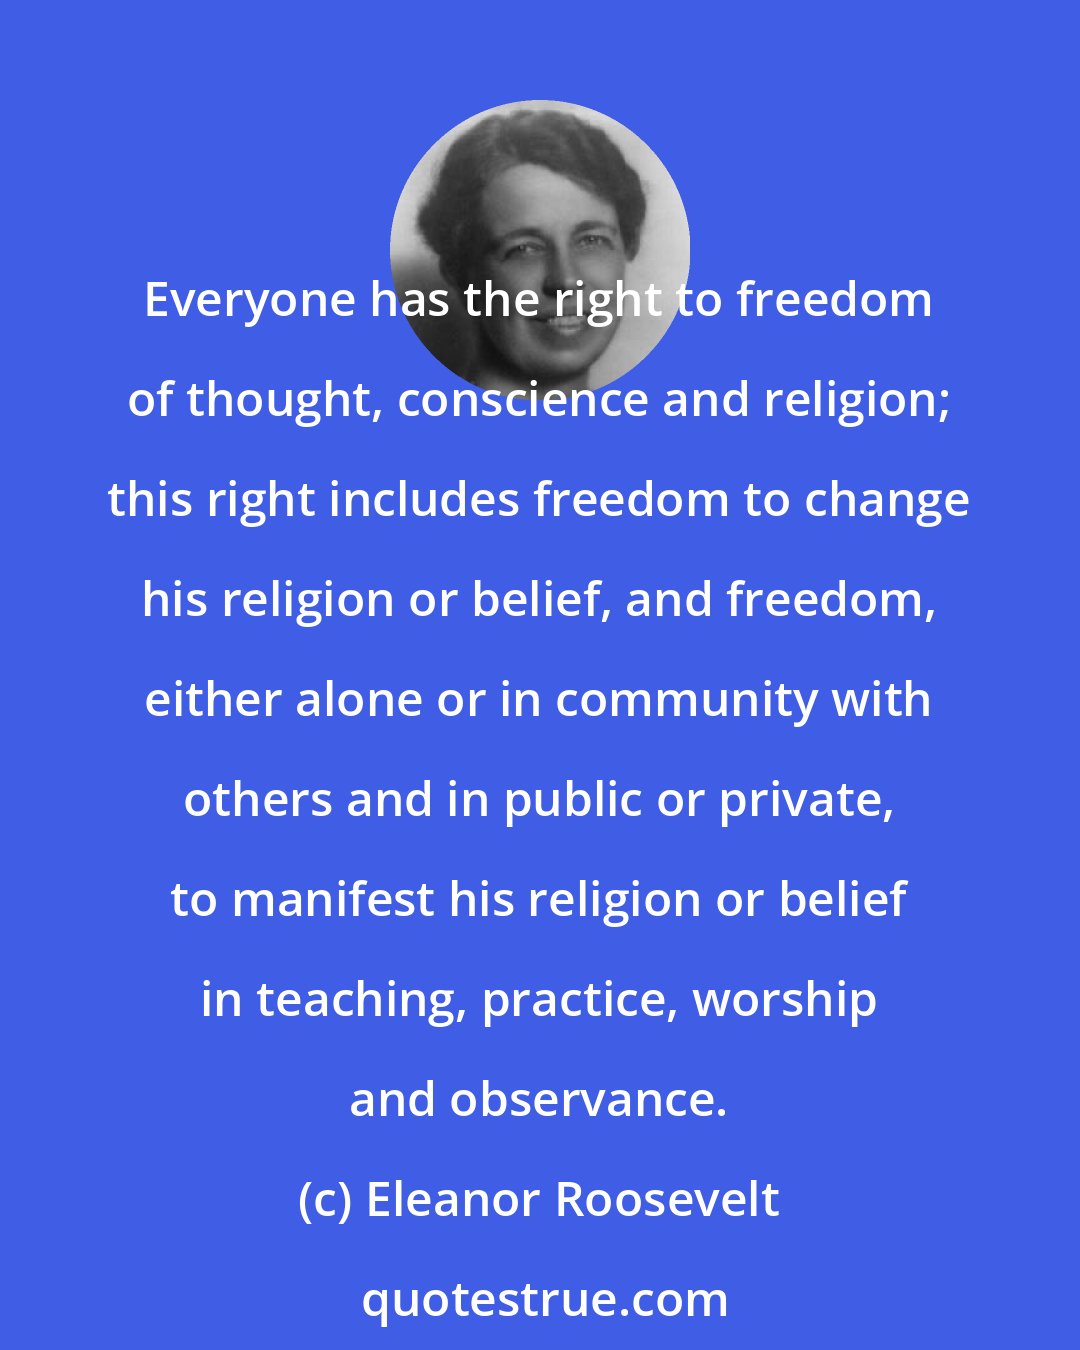 Eleanor Roosevelt: Everyone has the right to freedom of thought, conscience and religion; this right includes freedom to change his religion or belief, and freedom, either alone or in community with others and in public or private, to manifest his religion or belief in teaching, practice, worship and observance.